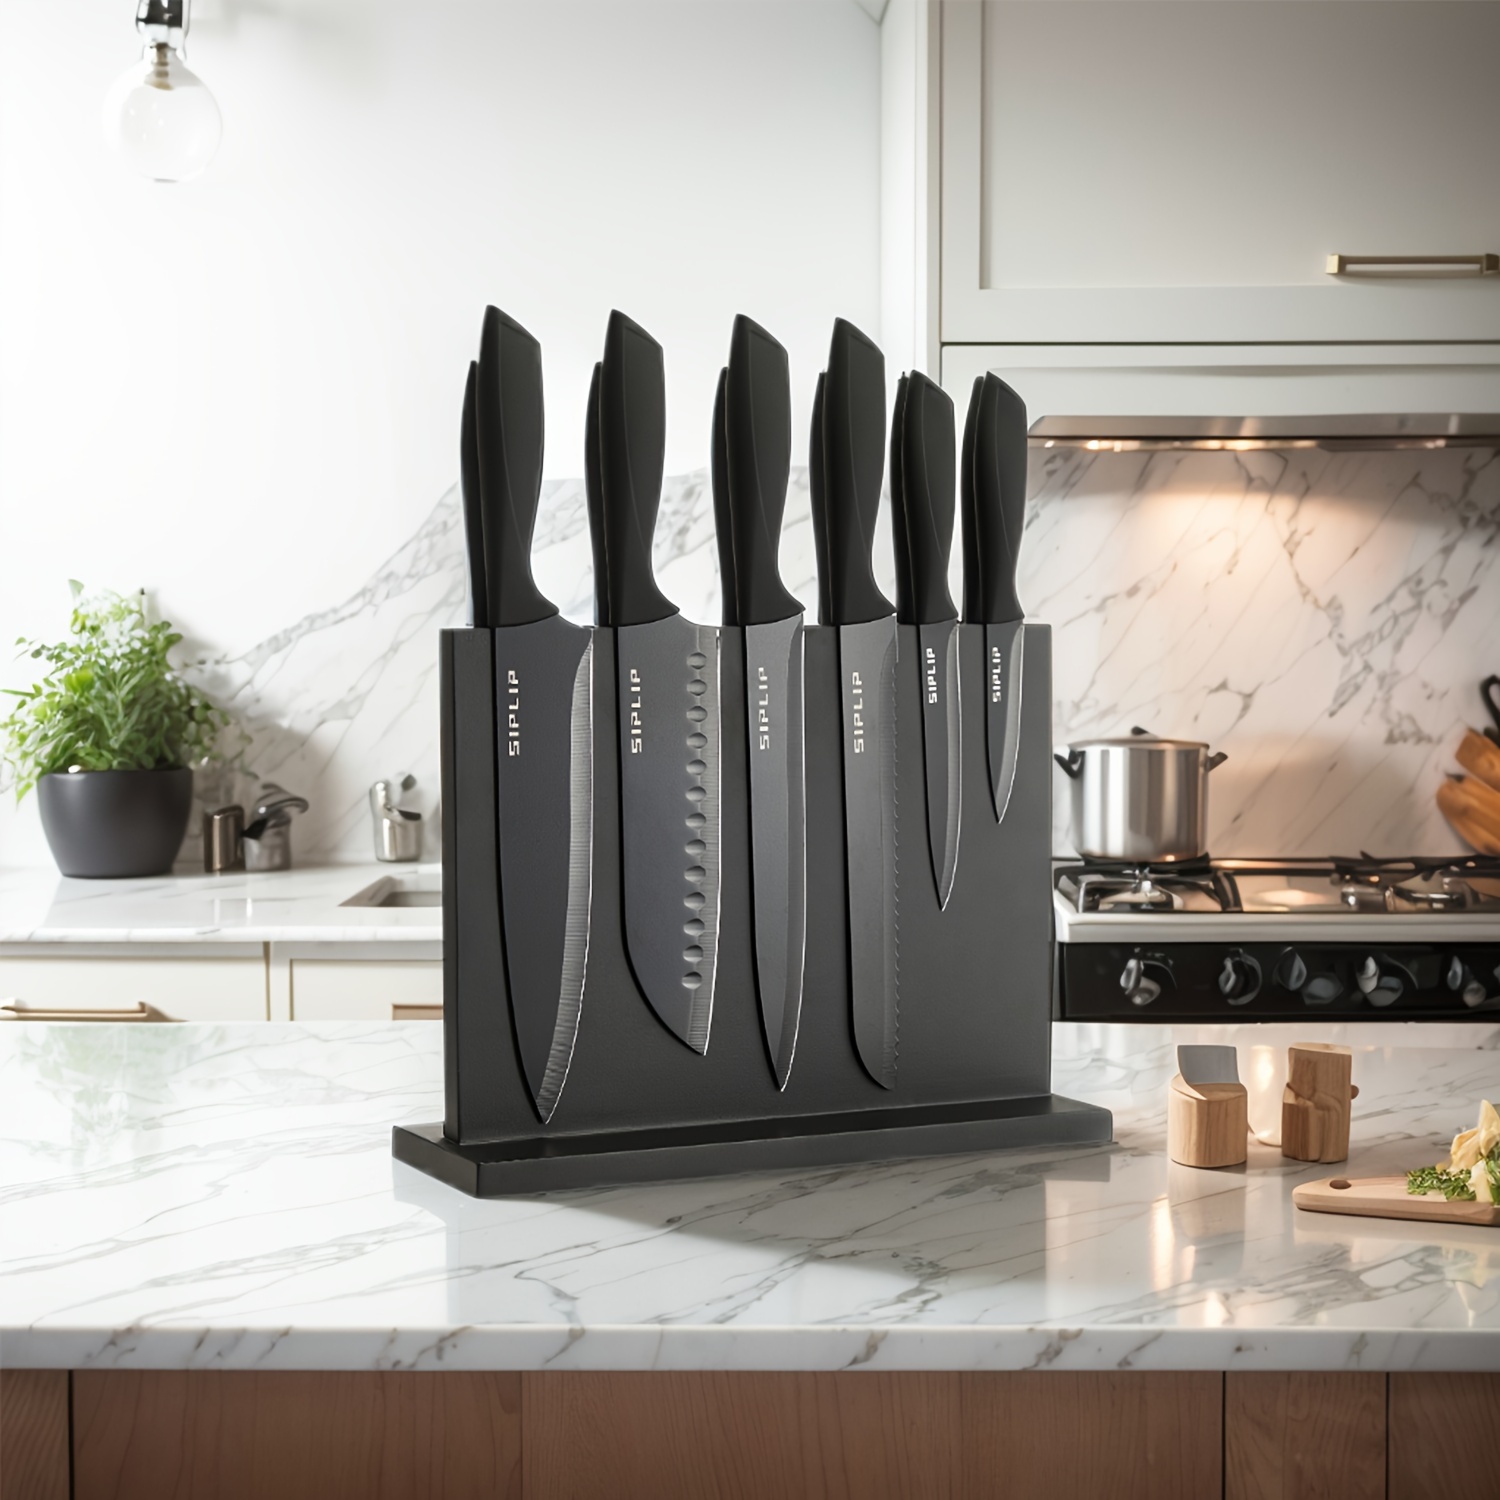 

15-piece Premium Kitchen Knife Set - Razor-sharp High Carbon Stainless Steel Chefs Knife Bread Knife Serrated Steak Knife Set Knife Sharpener And Magnetic Holder - Durable For Corrosion Resistance